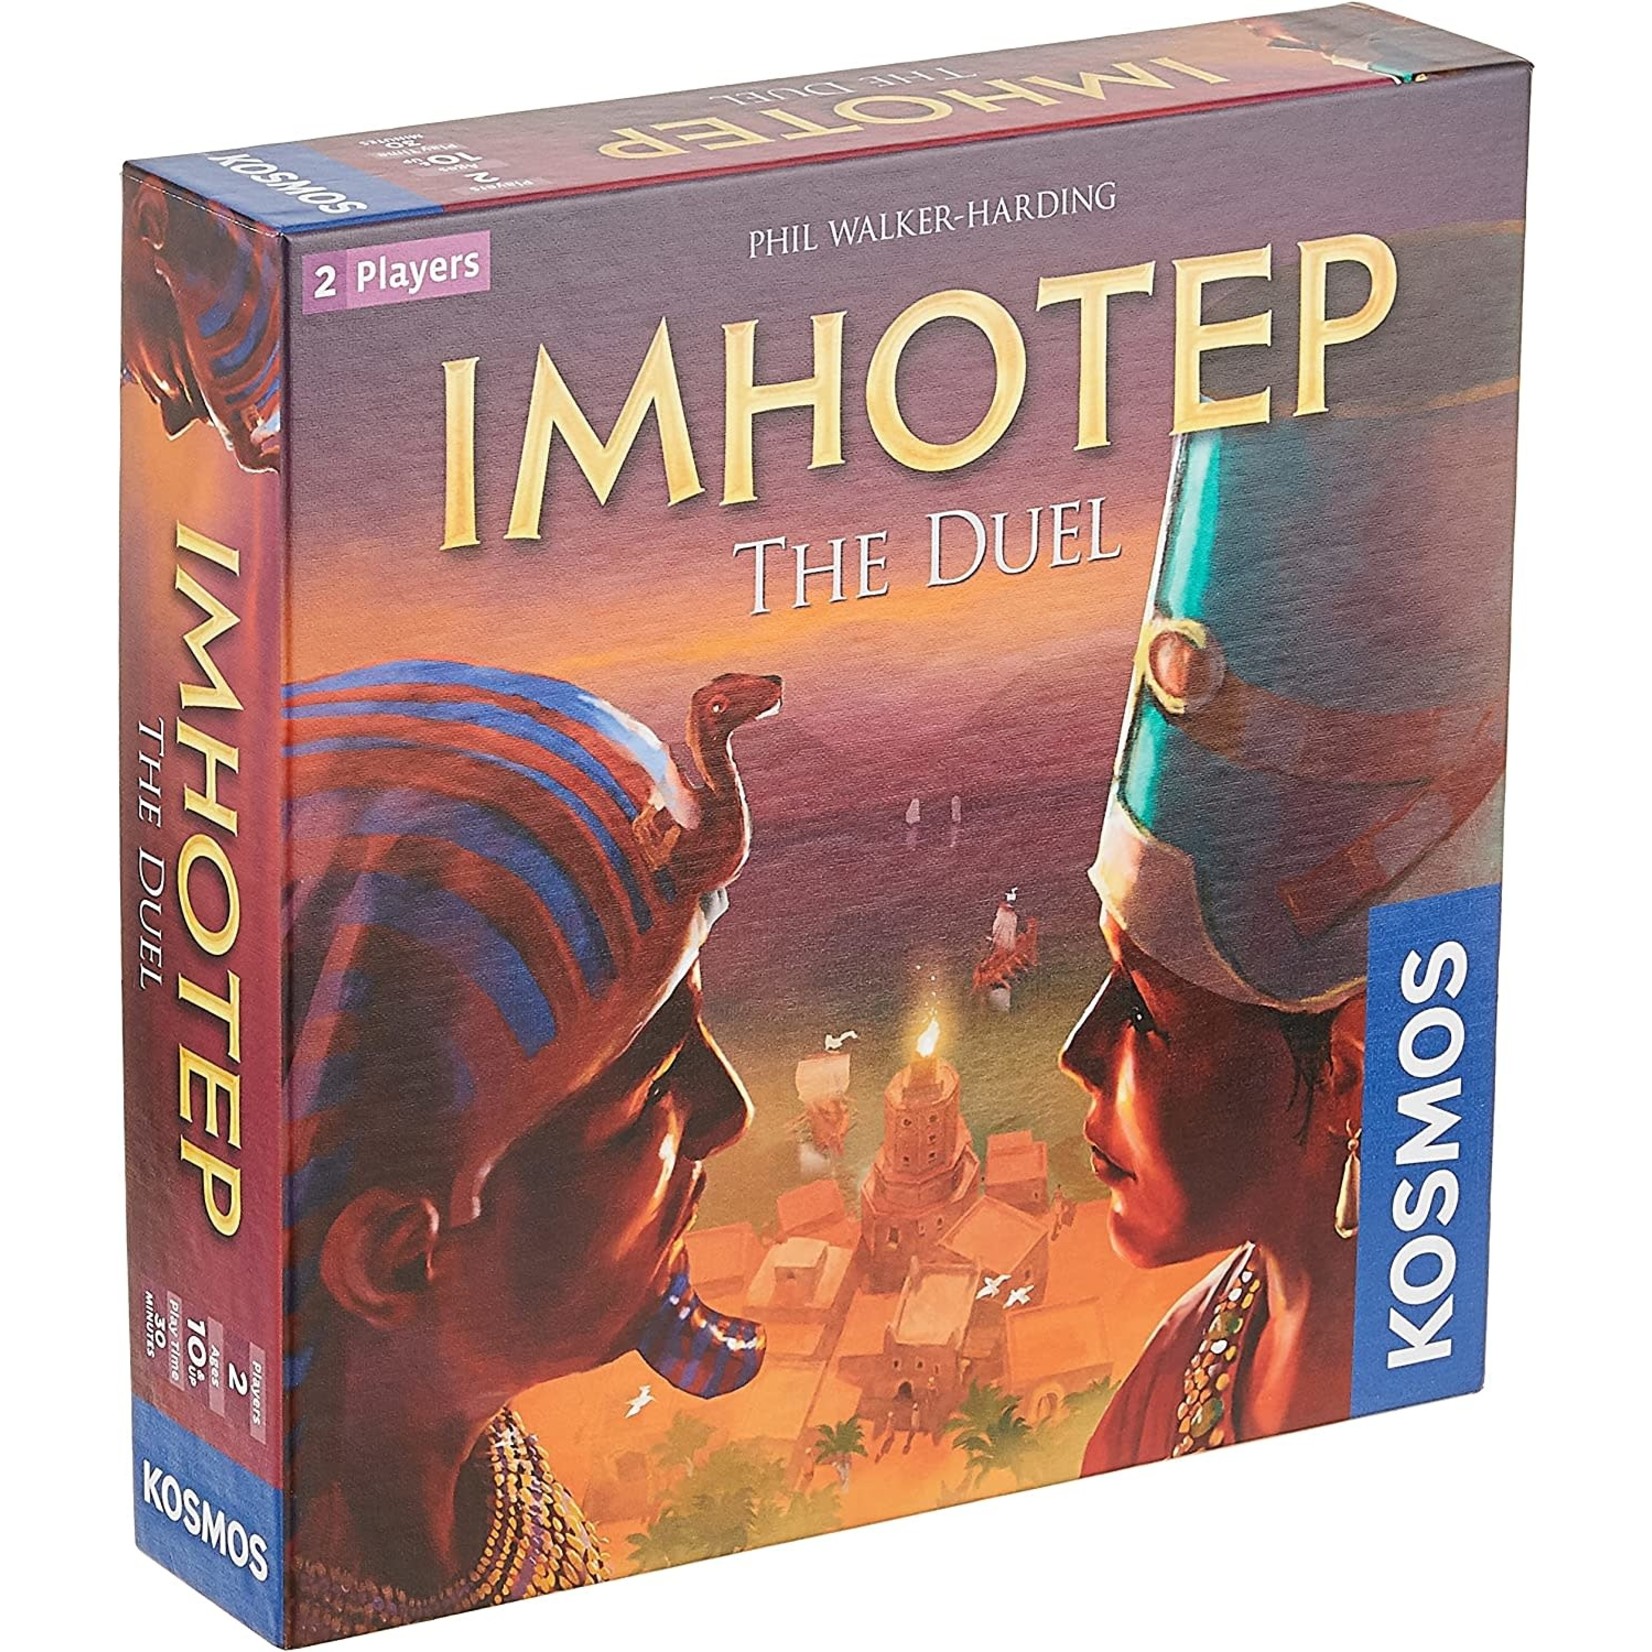 Imhotep, The Duel 2 player Board Game